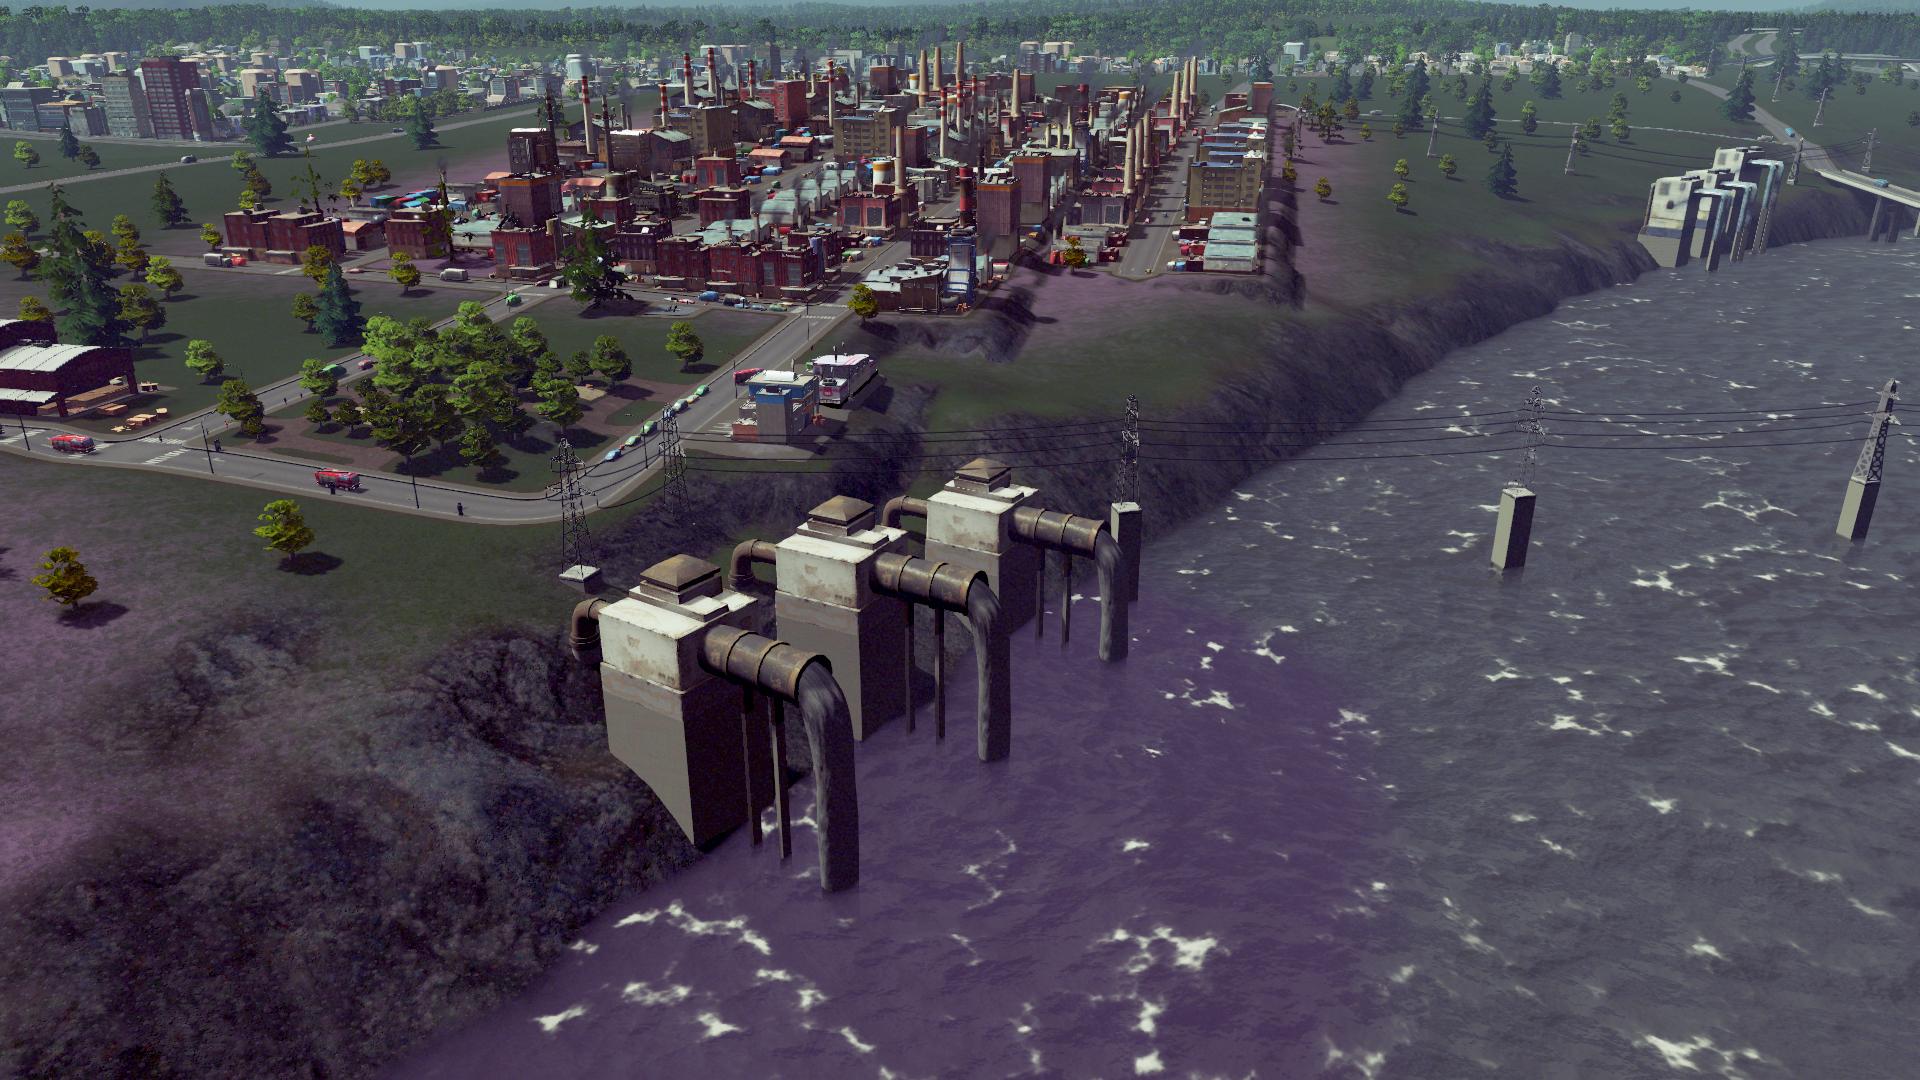 Cities: Skylines Review: An Addictive City-Builder